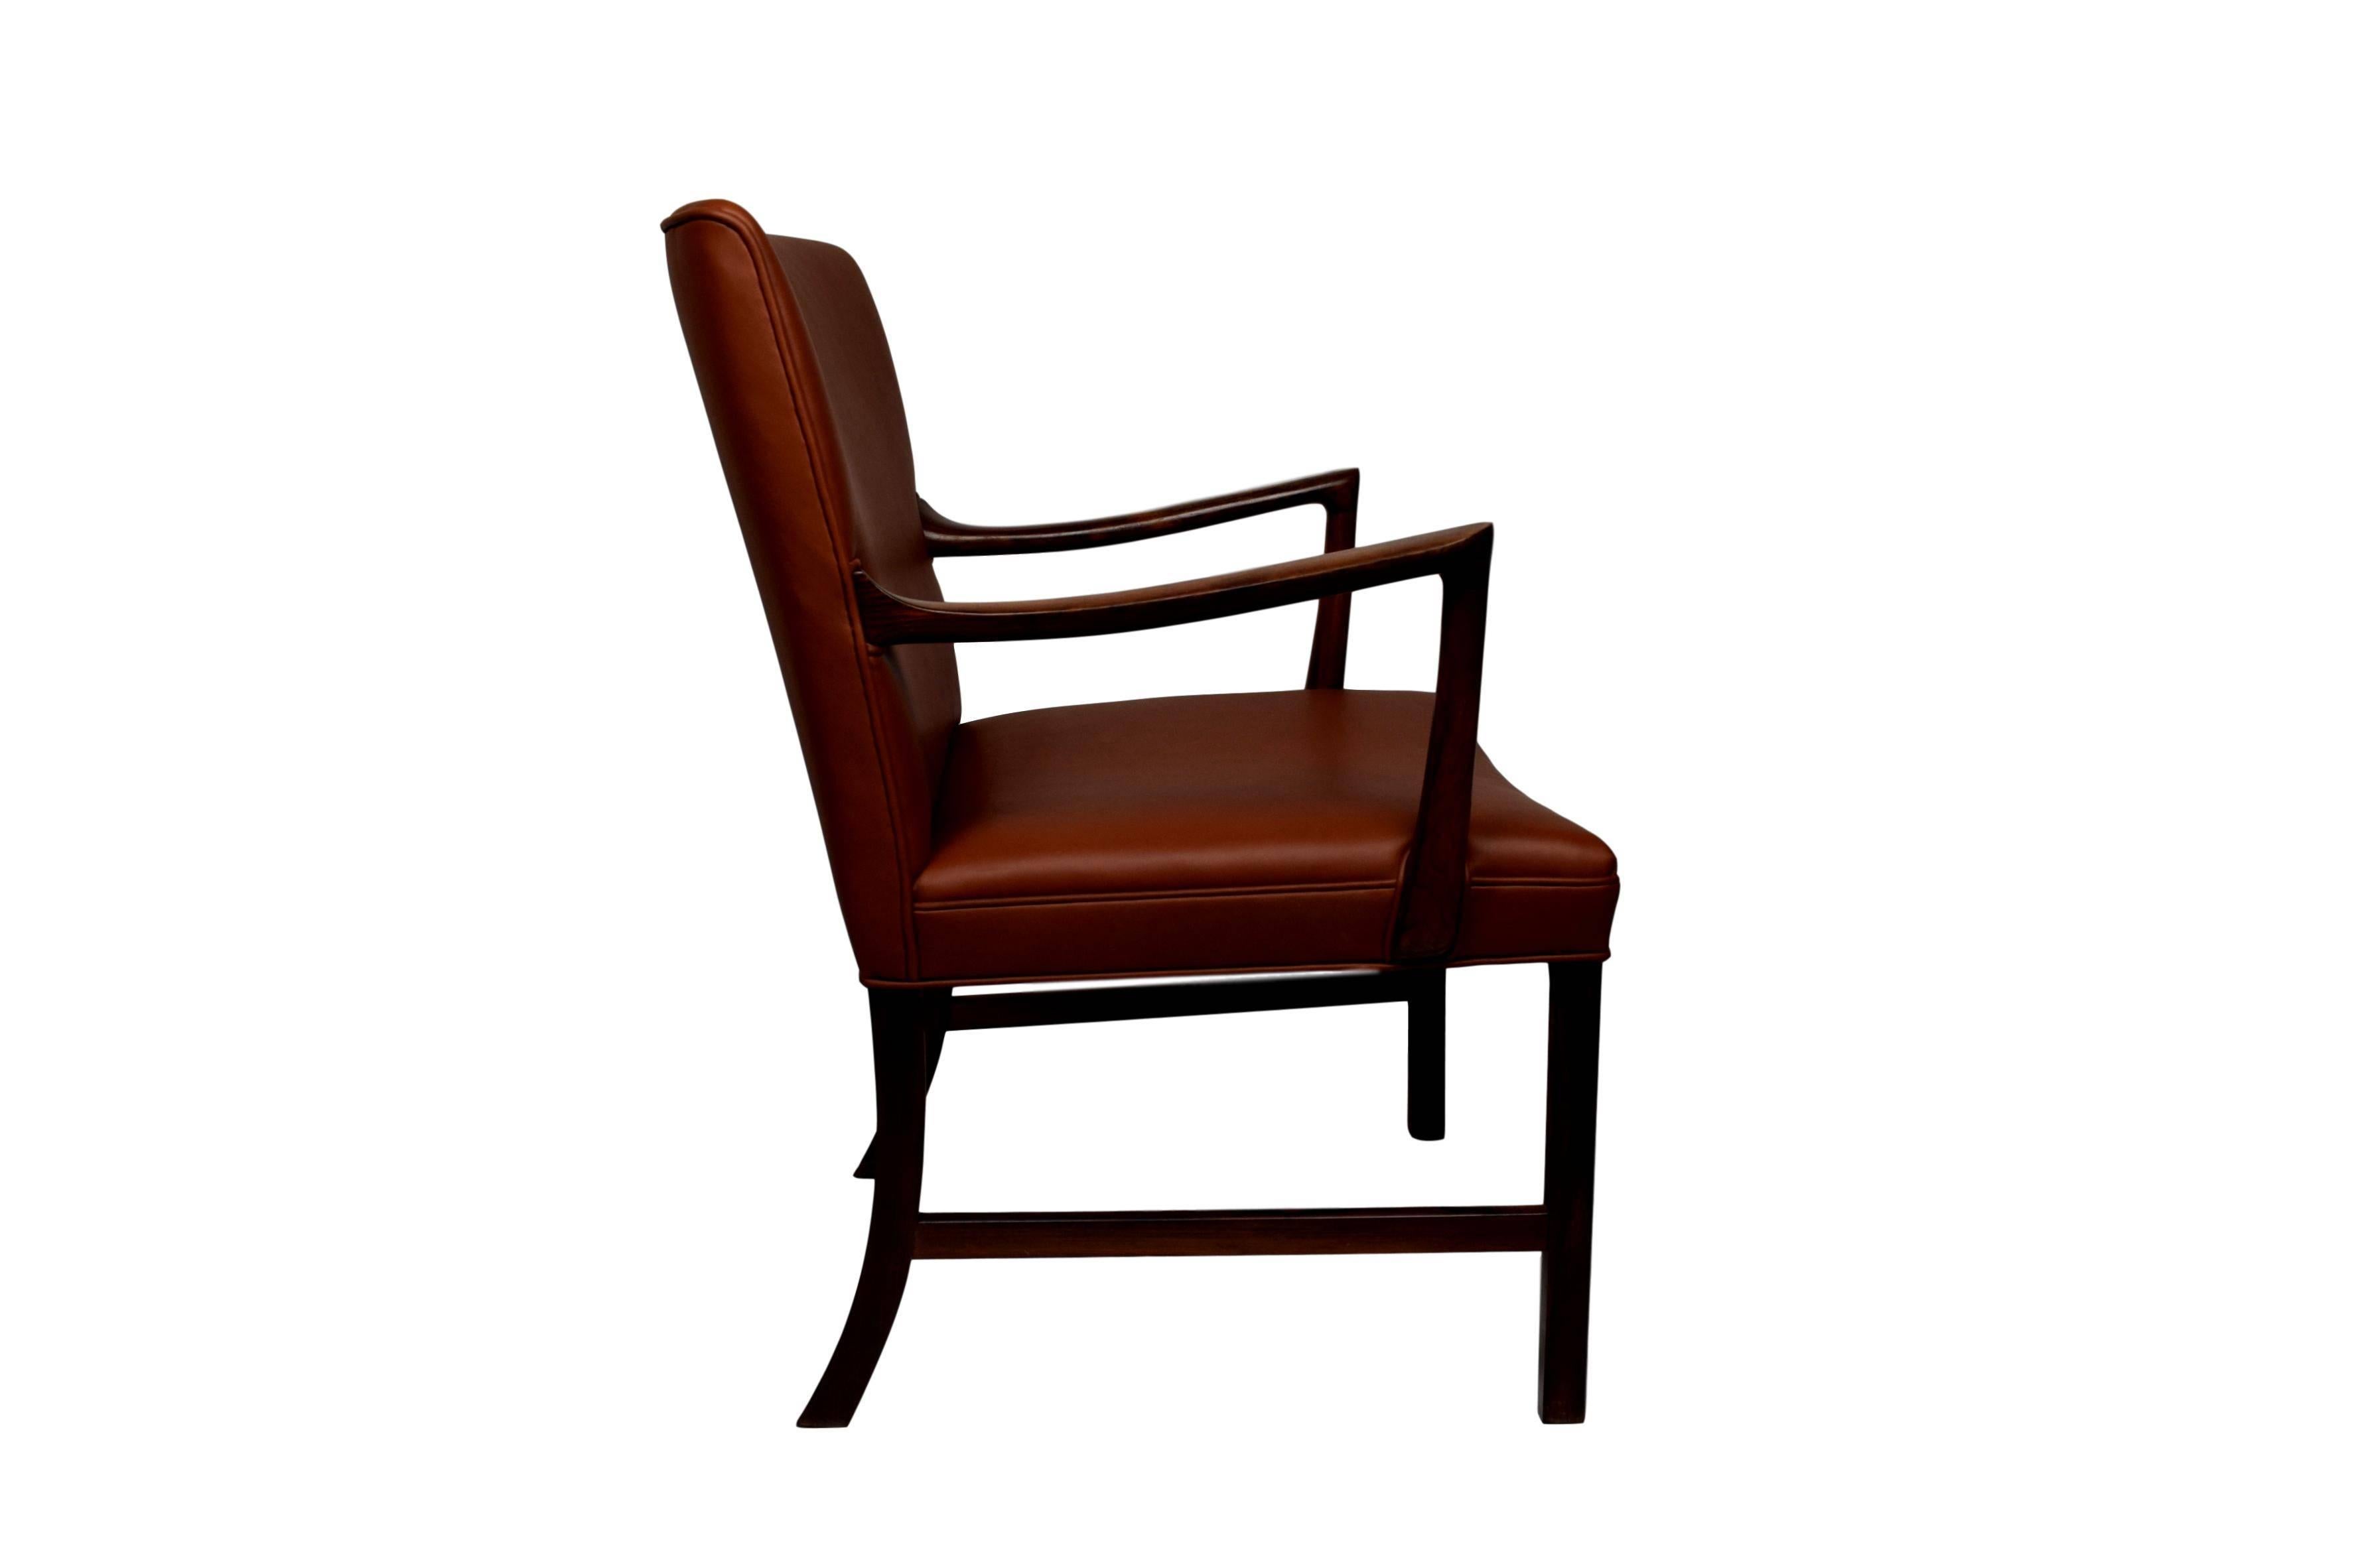 Mid-20th Century Midcentury Rosewood Armchair by Ole Wanscher, Upholstered with Aniline Leather For Sale